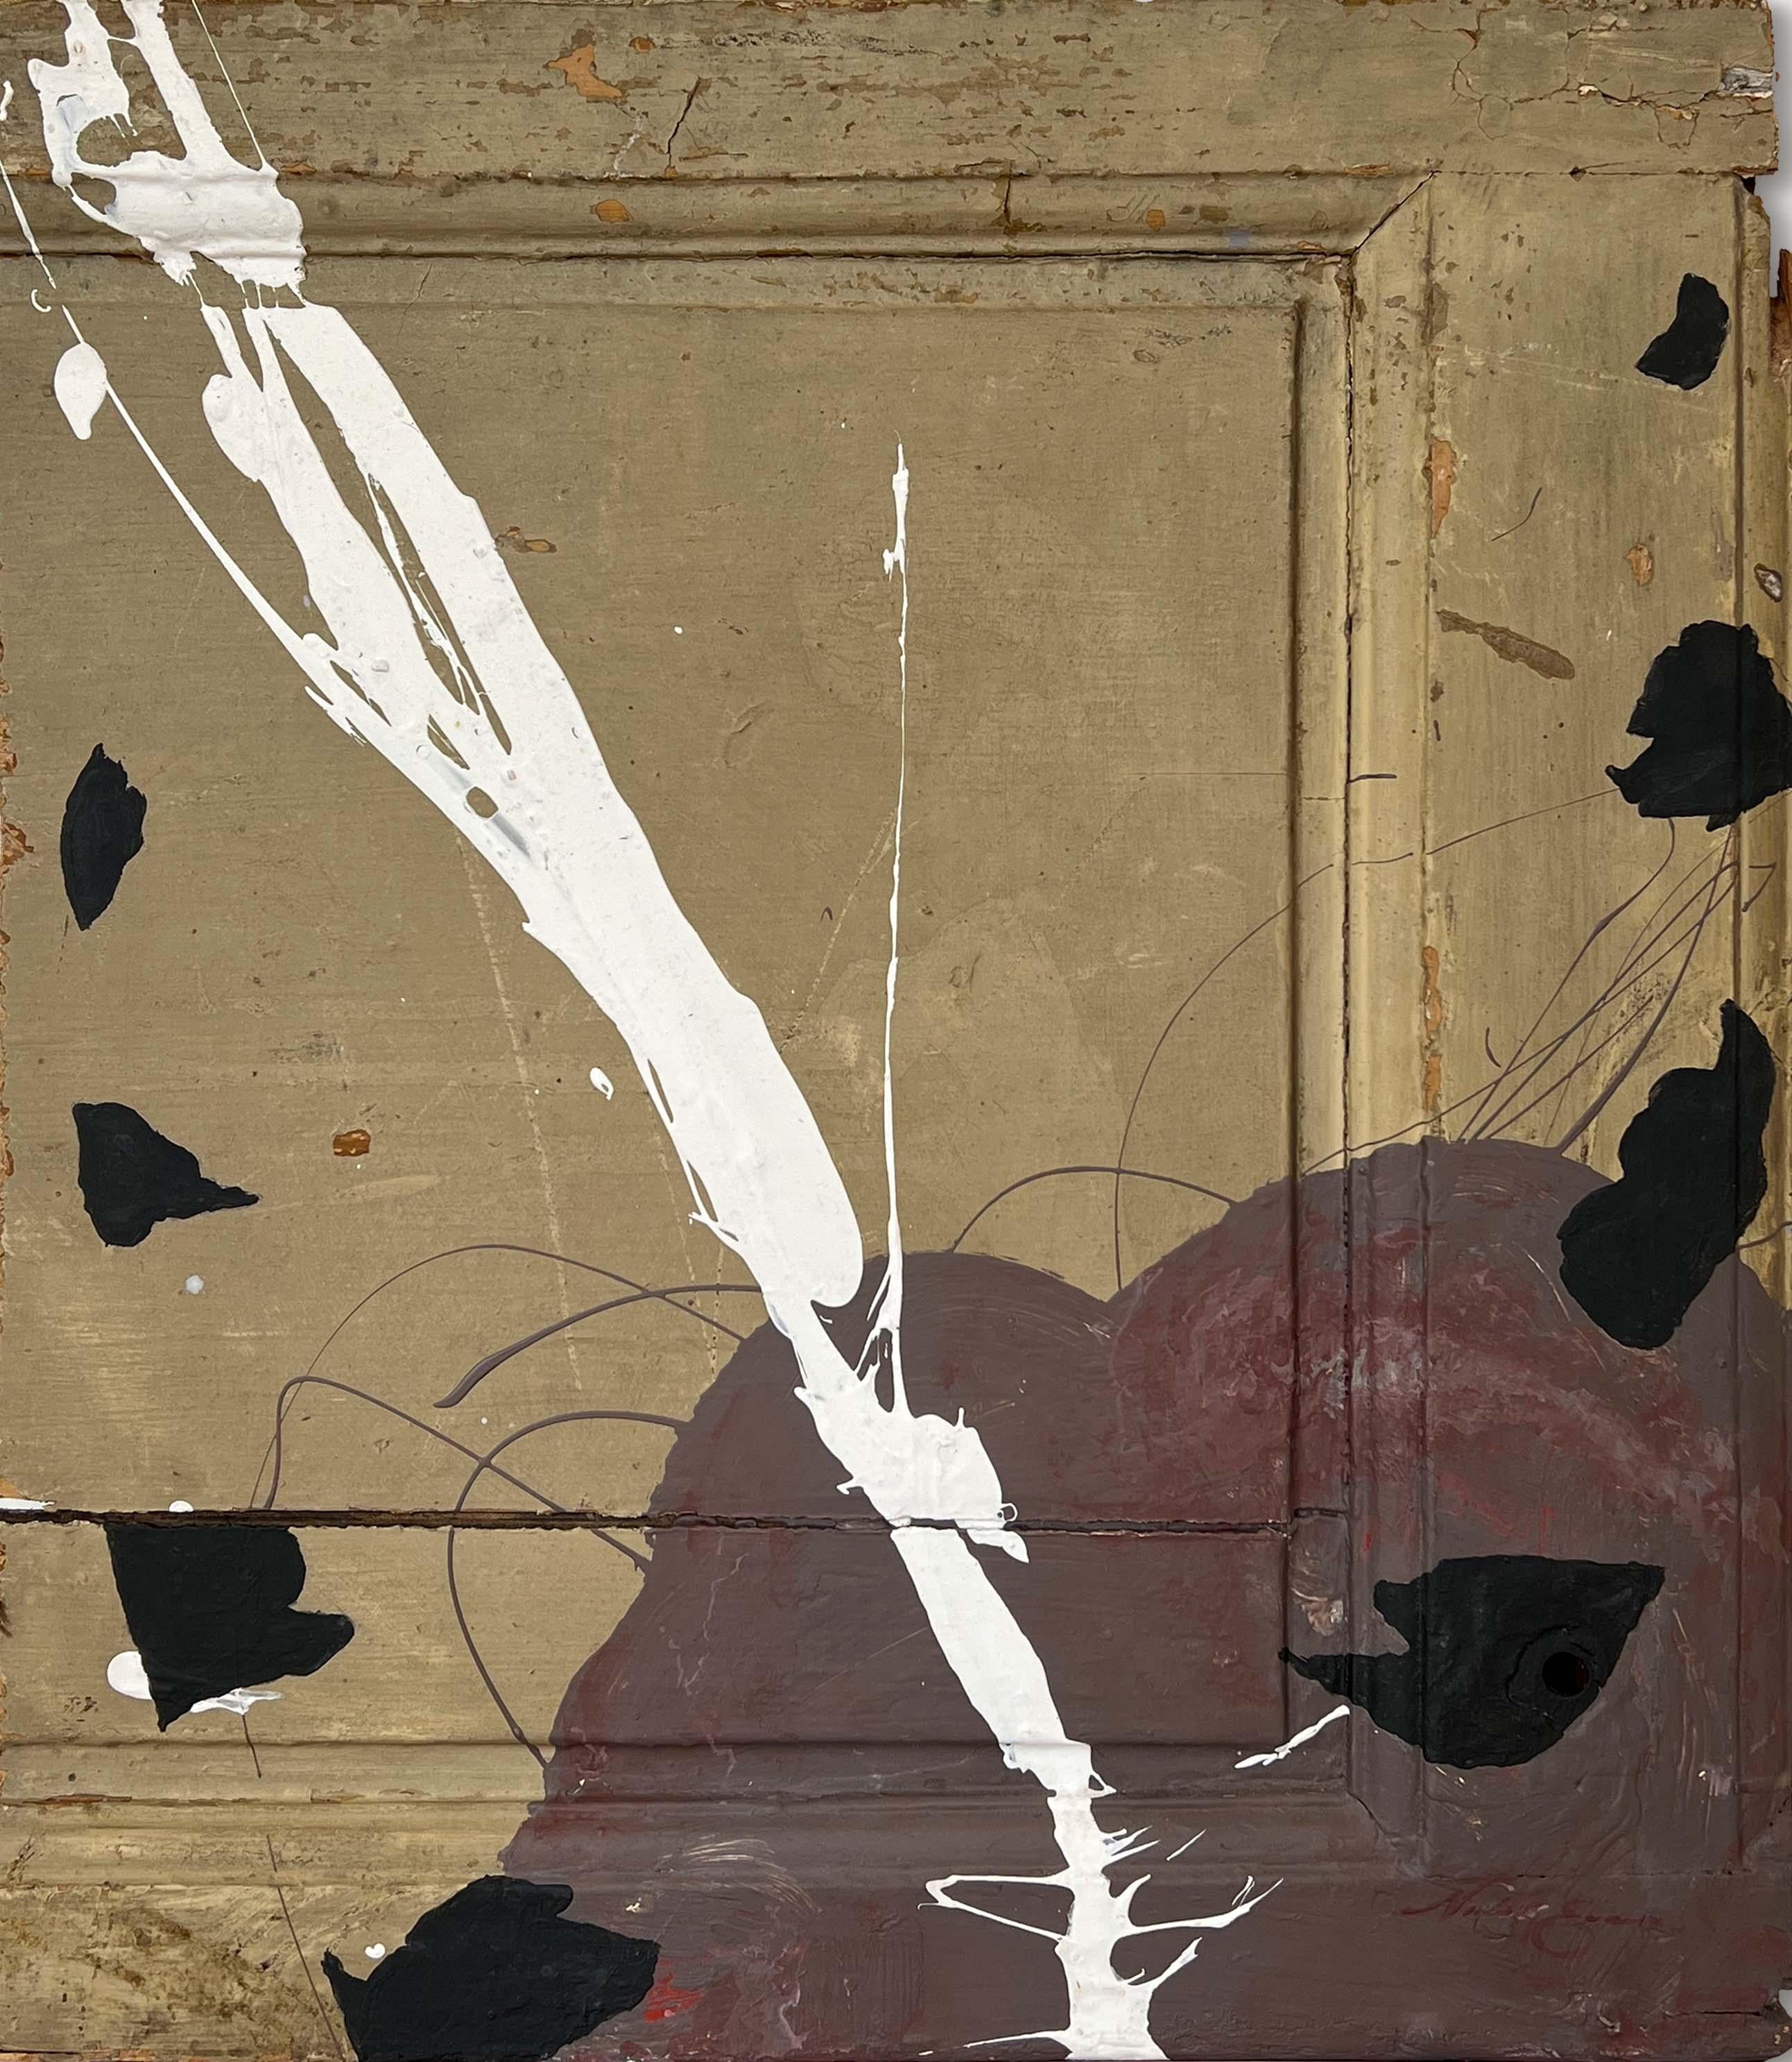 "SUTIV" (Abstract, Bold, Graphic, Neutral, Painting on Antique Wood Door)